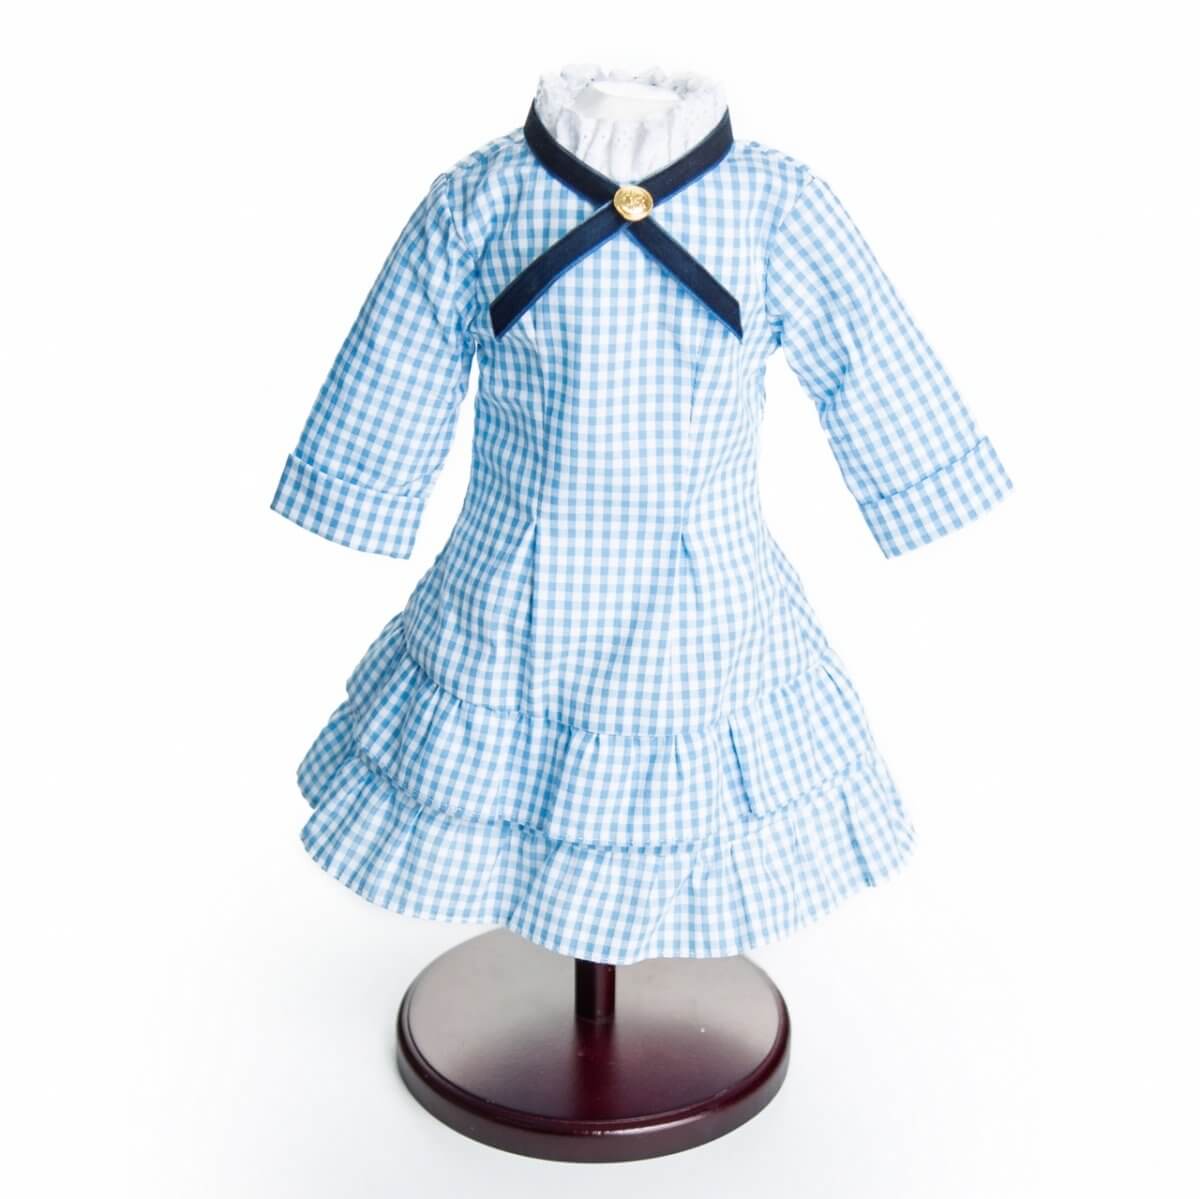 Little House On The Prairie Blue Check Dress, Clothes for 18 Inch Dolls - Simon's Collectibles